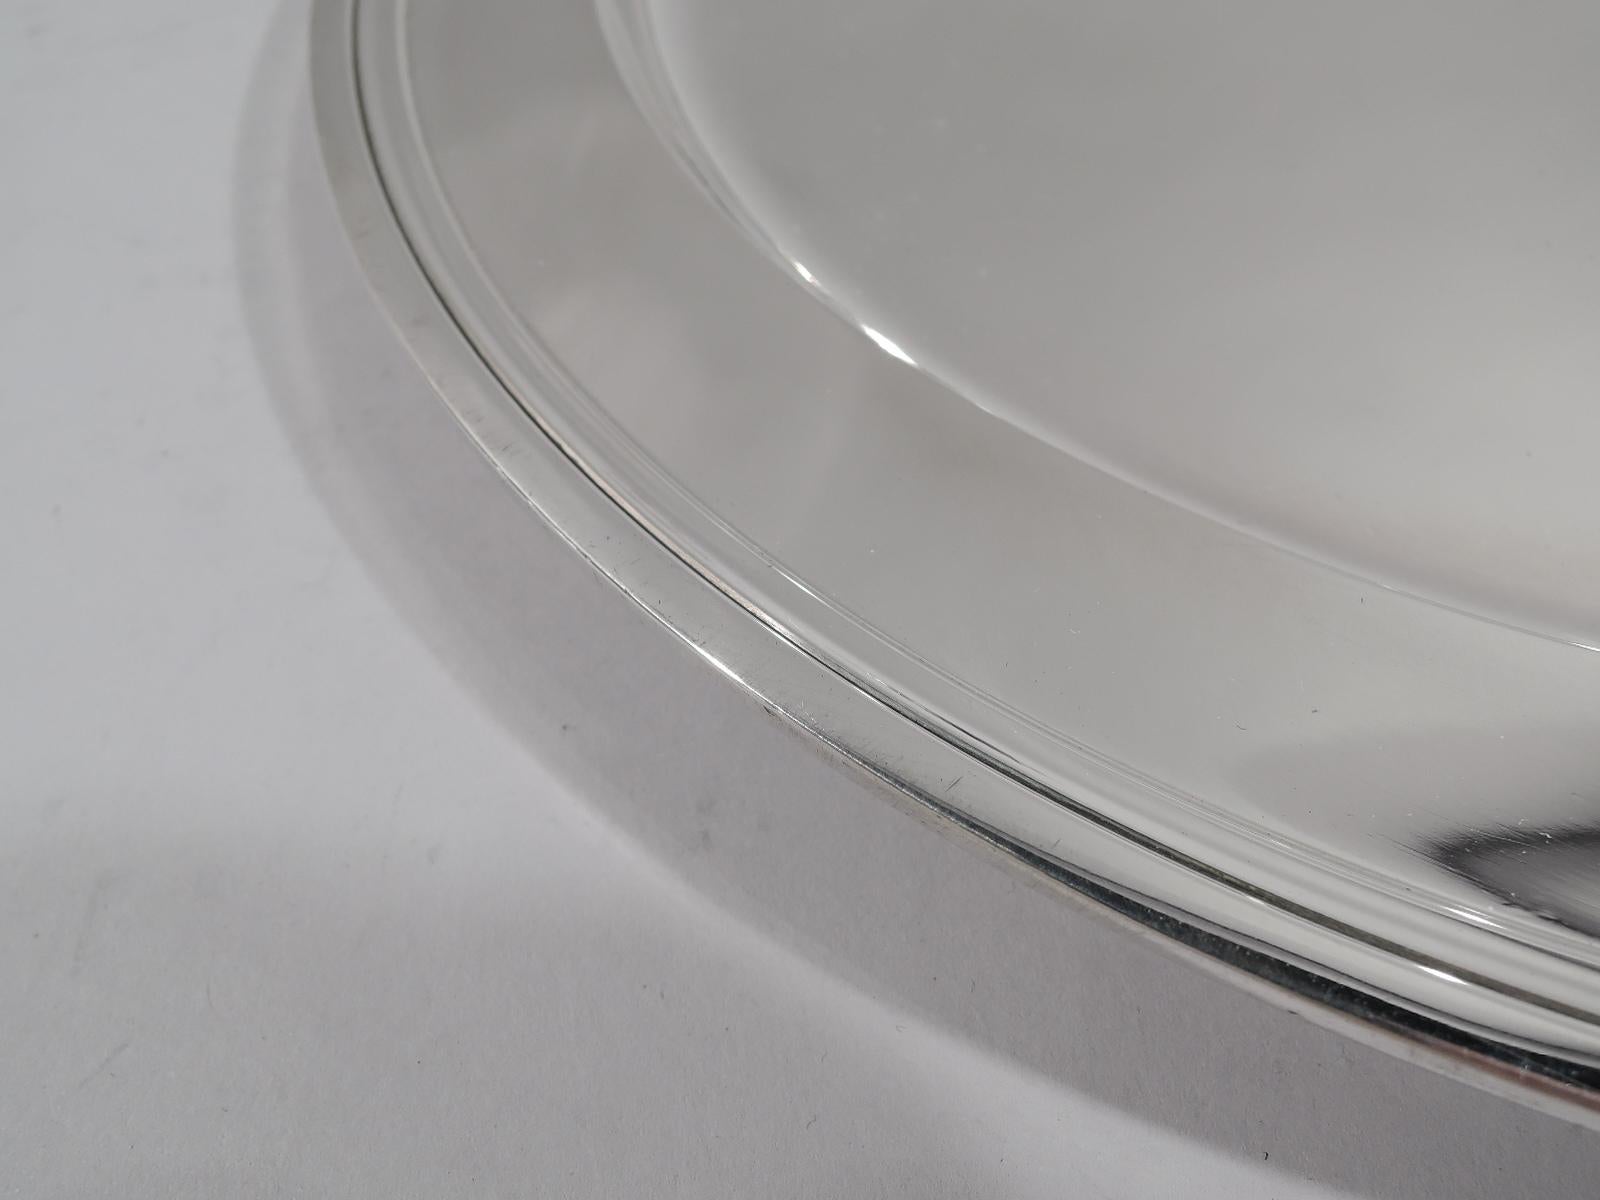 Modern sterling silver serving tray. Made by Tiffany & Co. in New York. Round with deep well and molded rim. Fully marked including pattern no. 20187, director’s letter M (1947-1956), and diameter. Weight: 21.5 troy ounces.